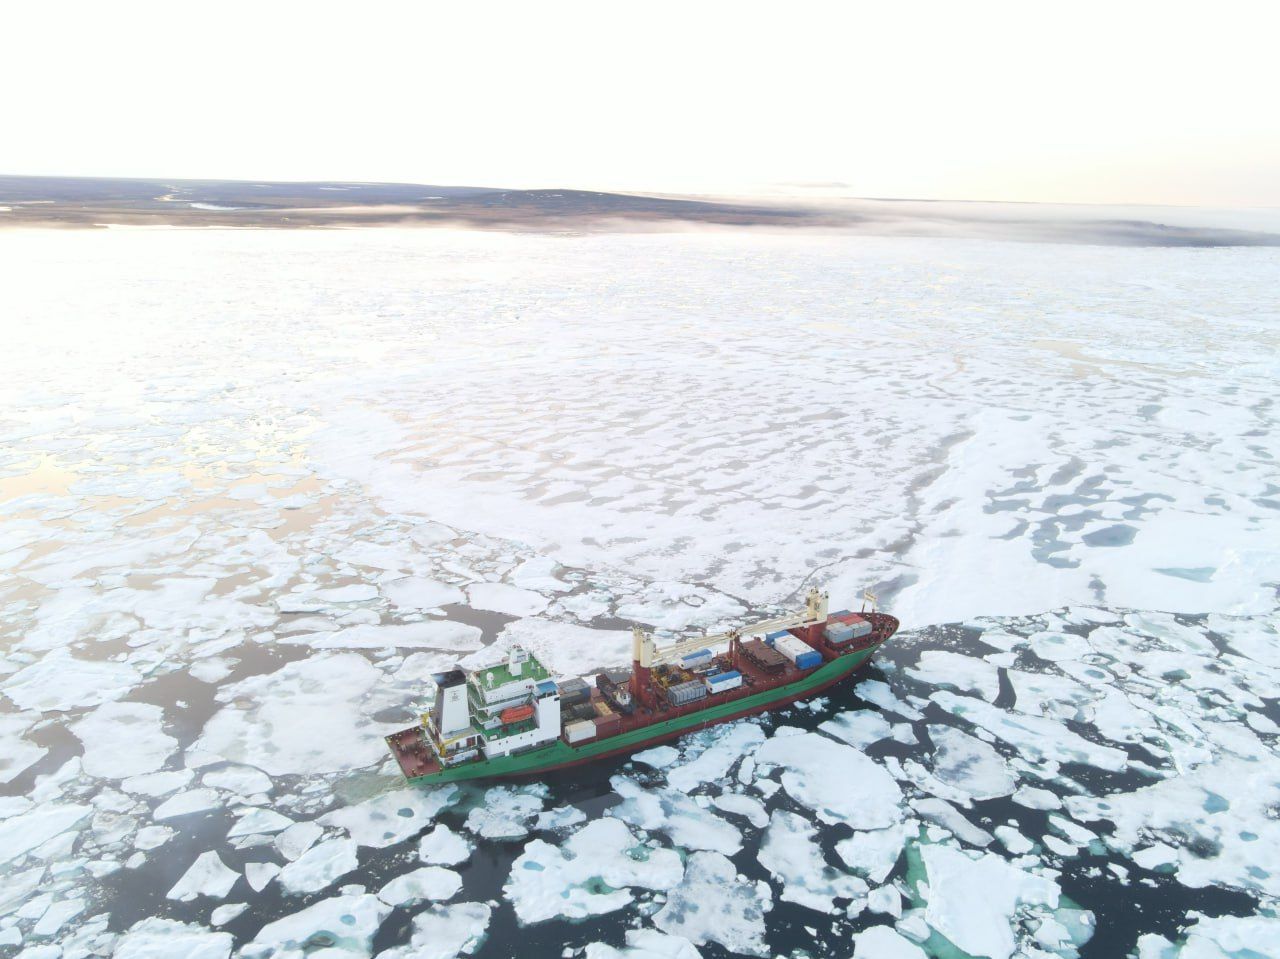 Residents in Arctic priority development areas to get tax breaks